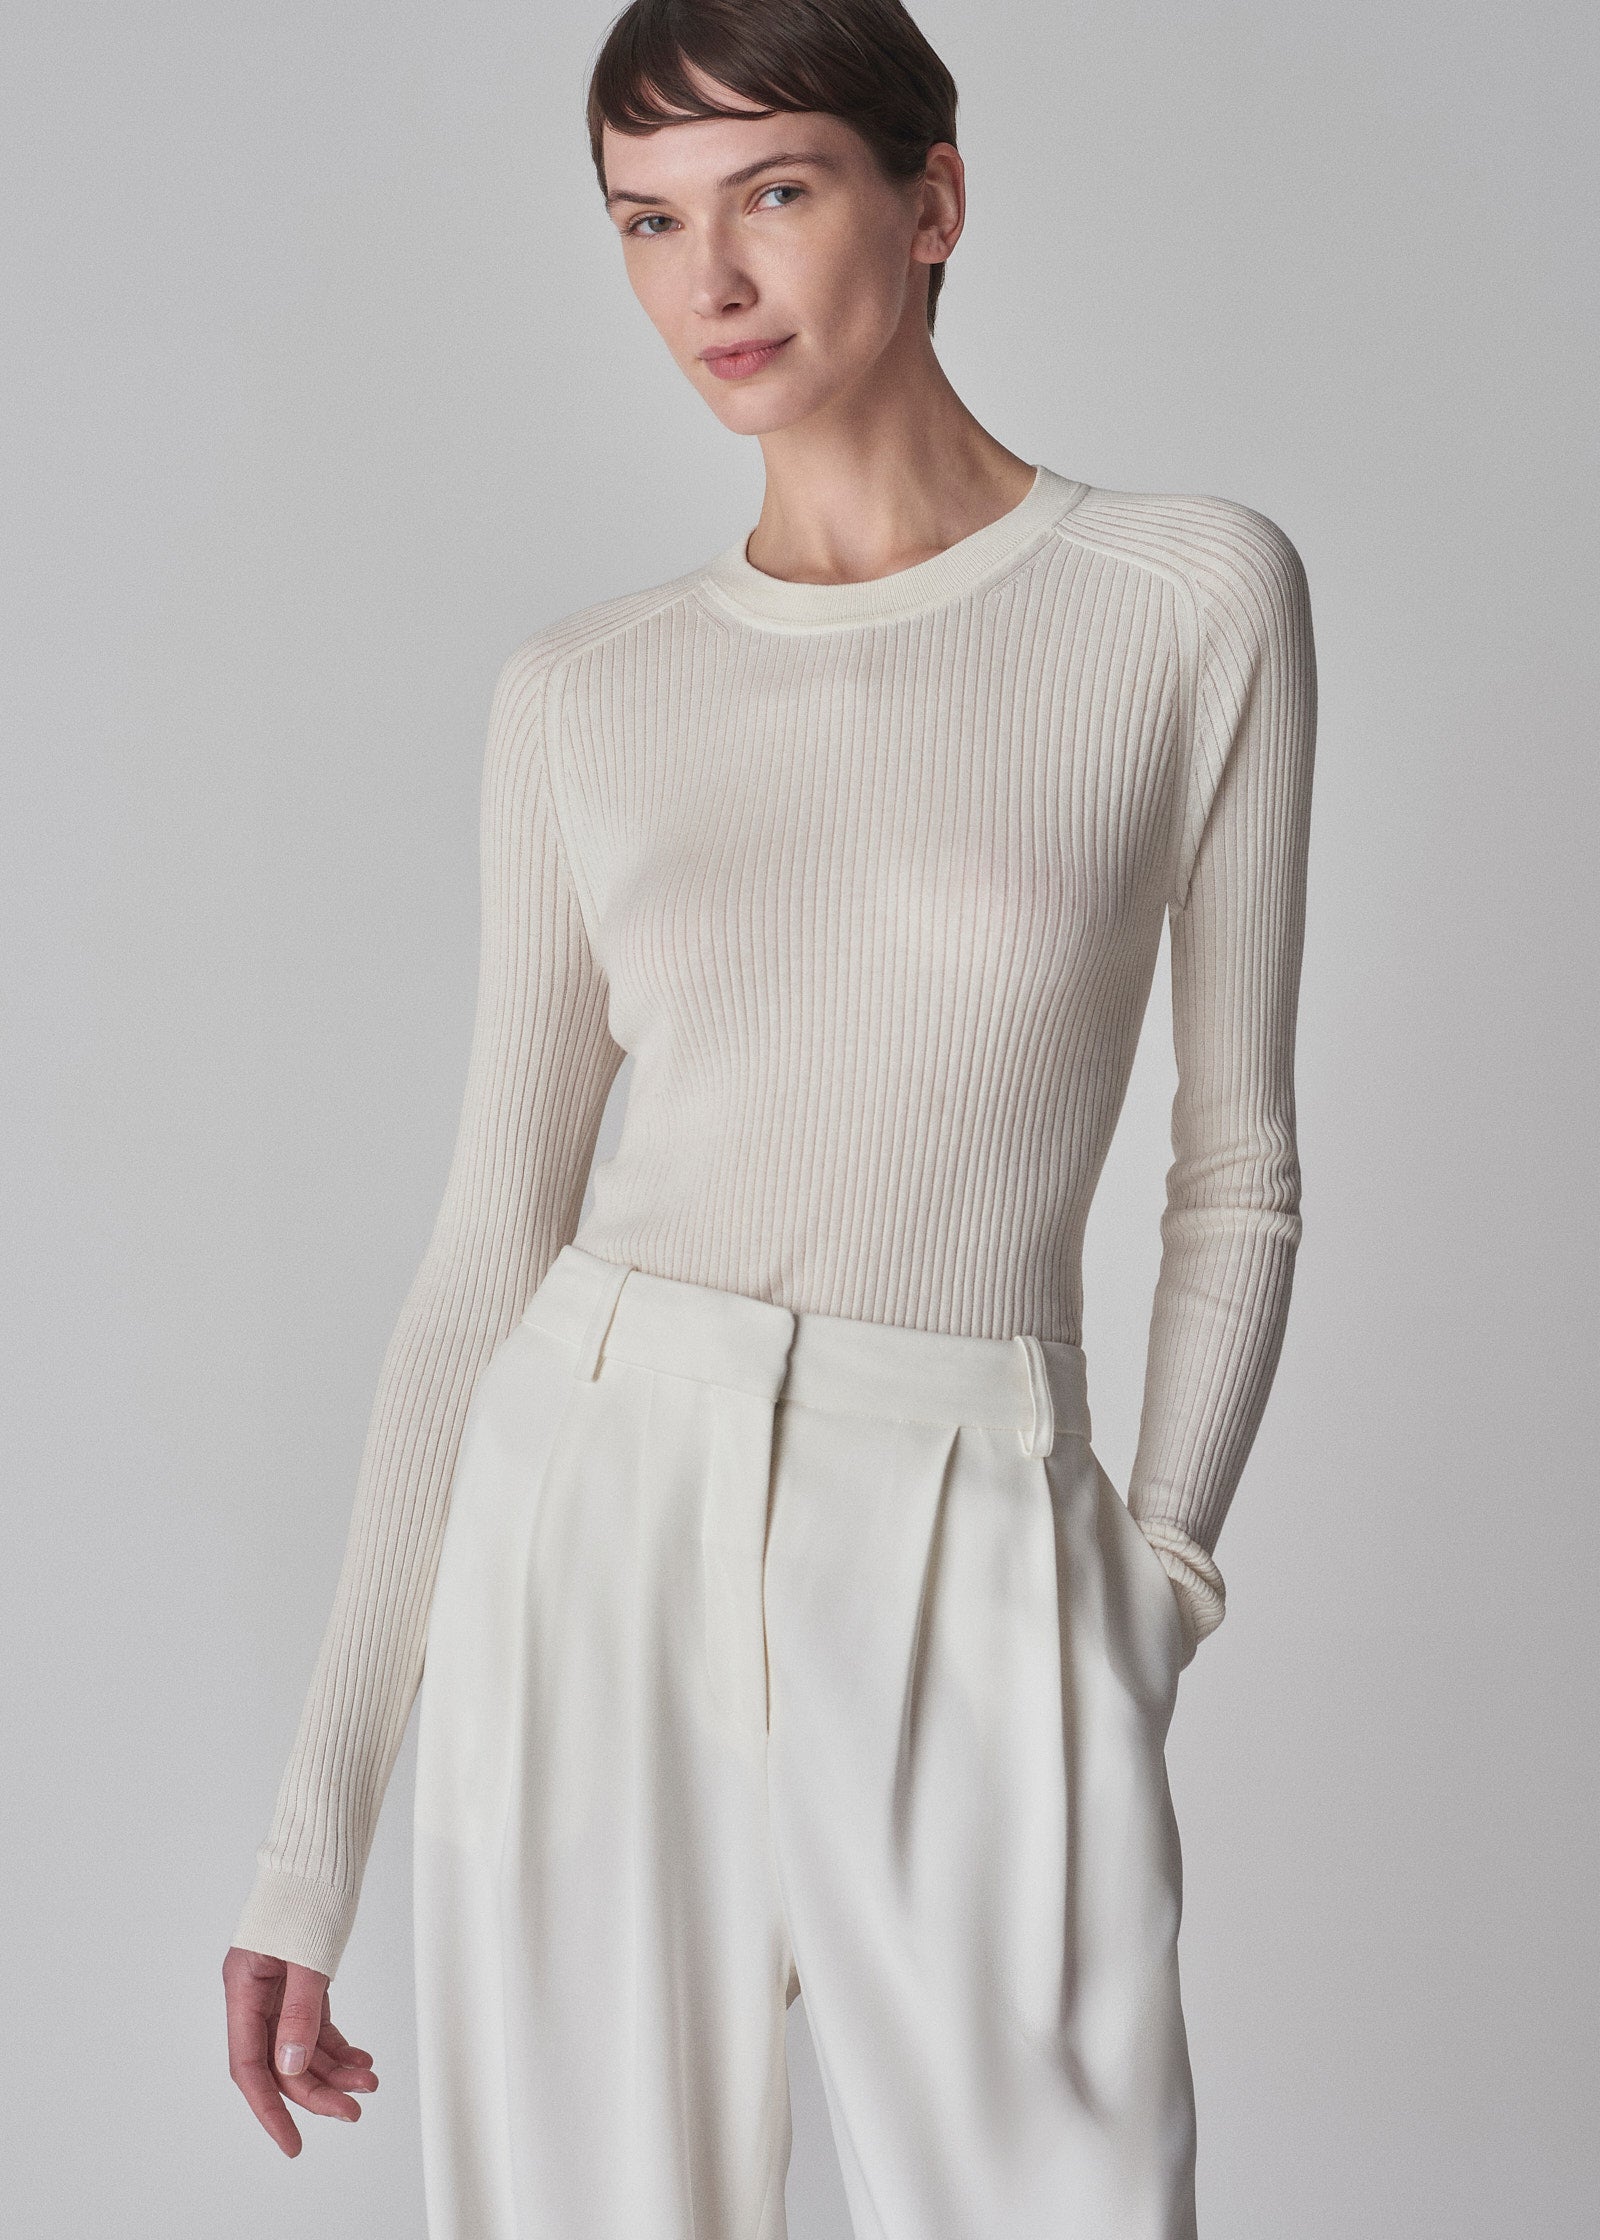 Long Sleeve Fitted Tee in Silk Knit - Ivory | CO